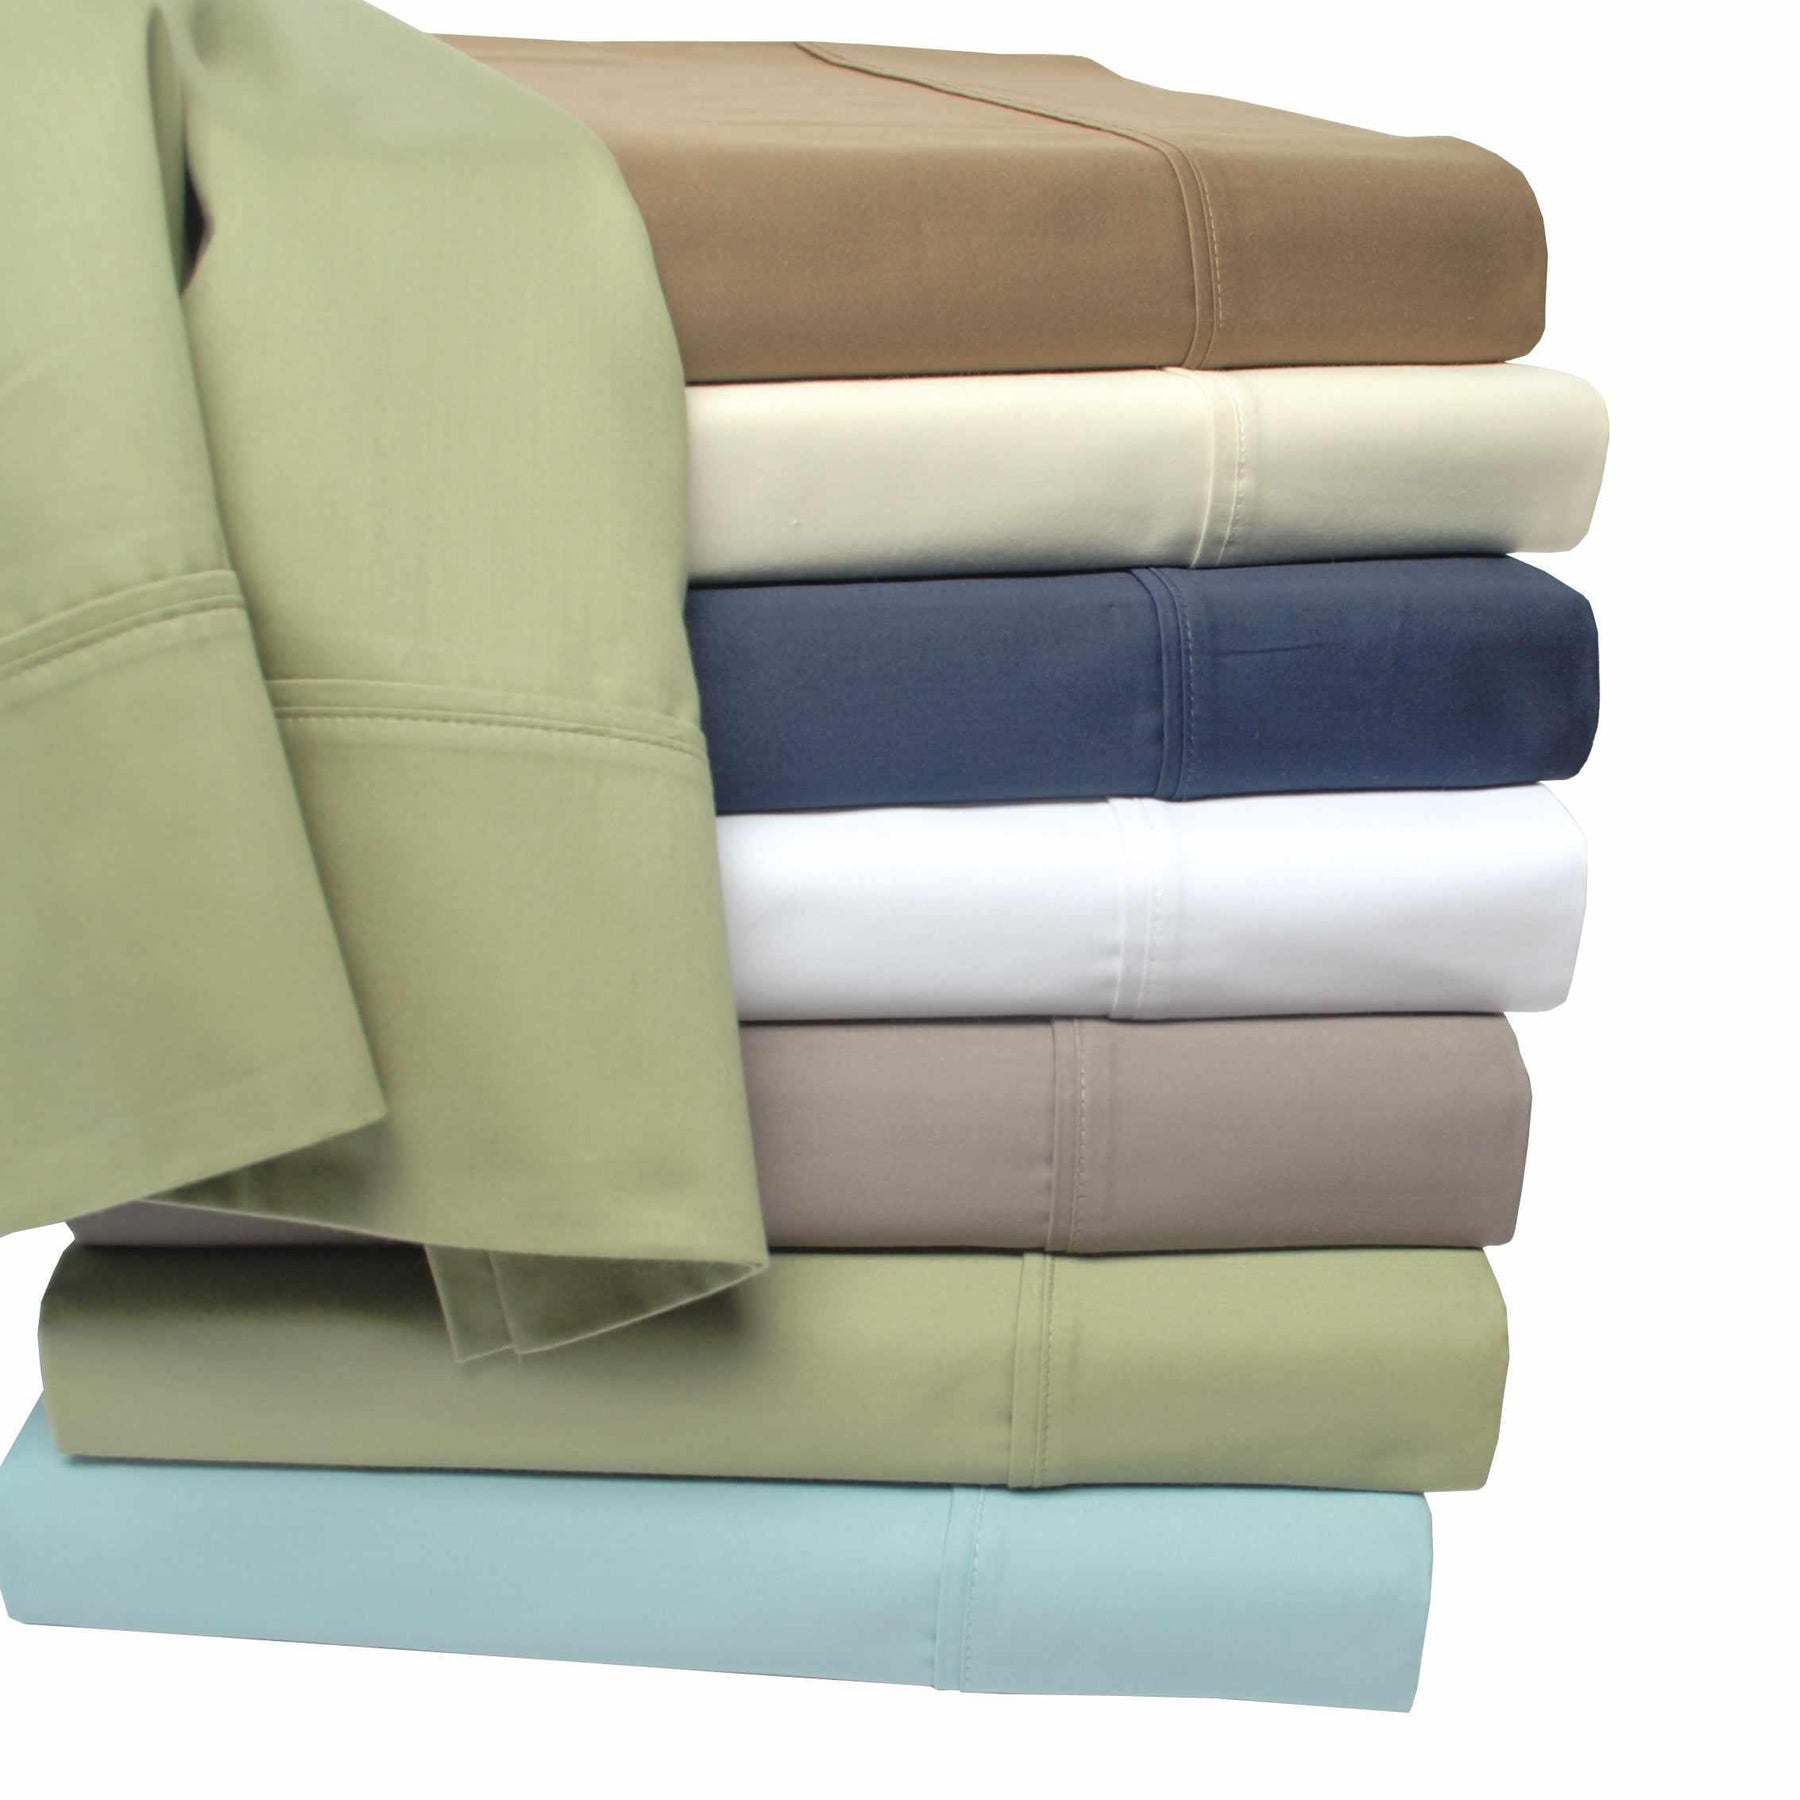  Superior 500-Thread Count Cotton Solid Ultra-Soft Deep Pocket Bed Sheets - Sage